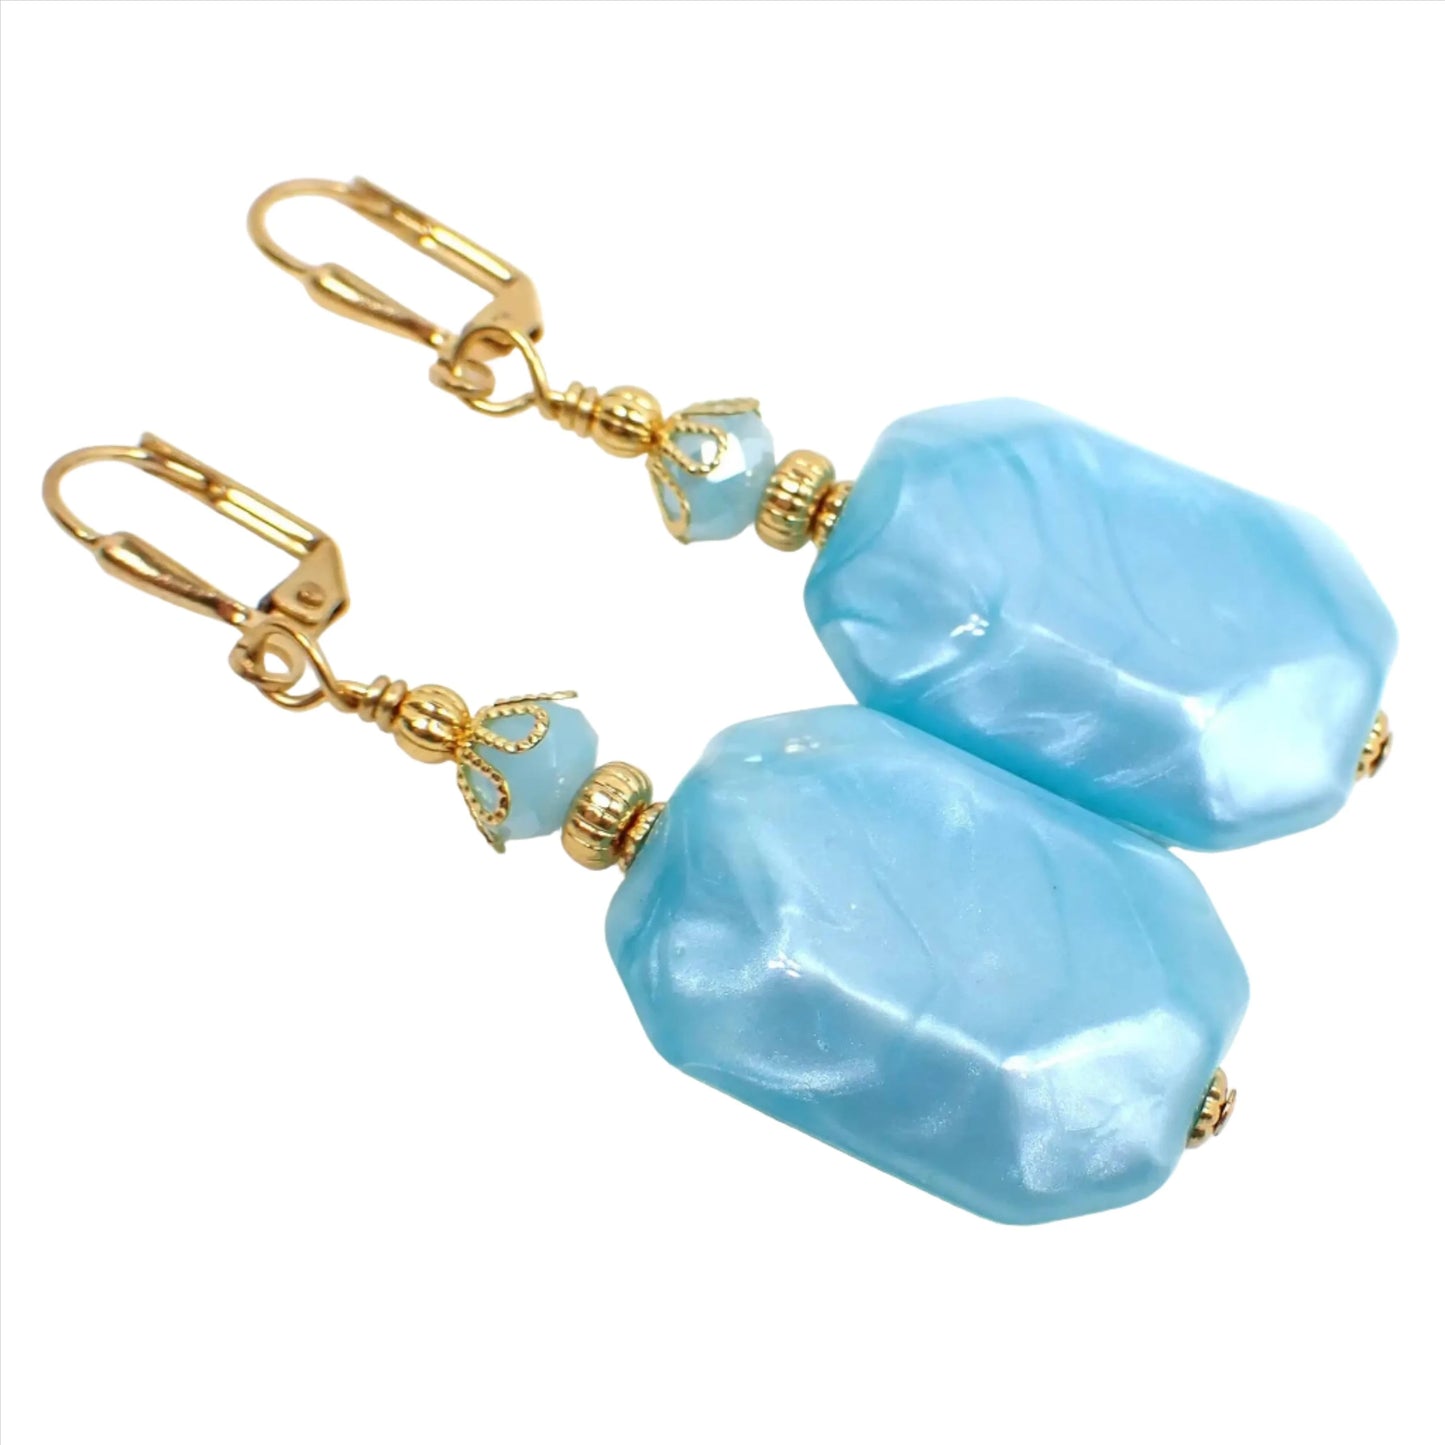 Angled view of the large handmade geometric earrings. The metal is gold plated in color. There are light blue faceted glass beads at the top. The bottom beads are vintage lucite beads that are faceted large octagon shape with a pearly baby blue color.